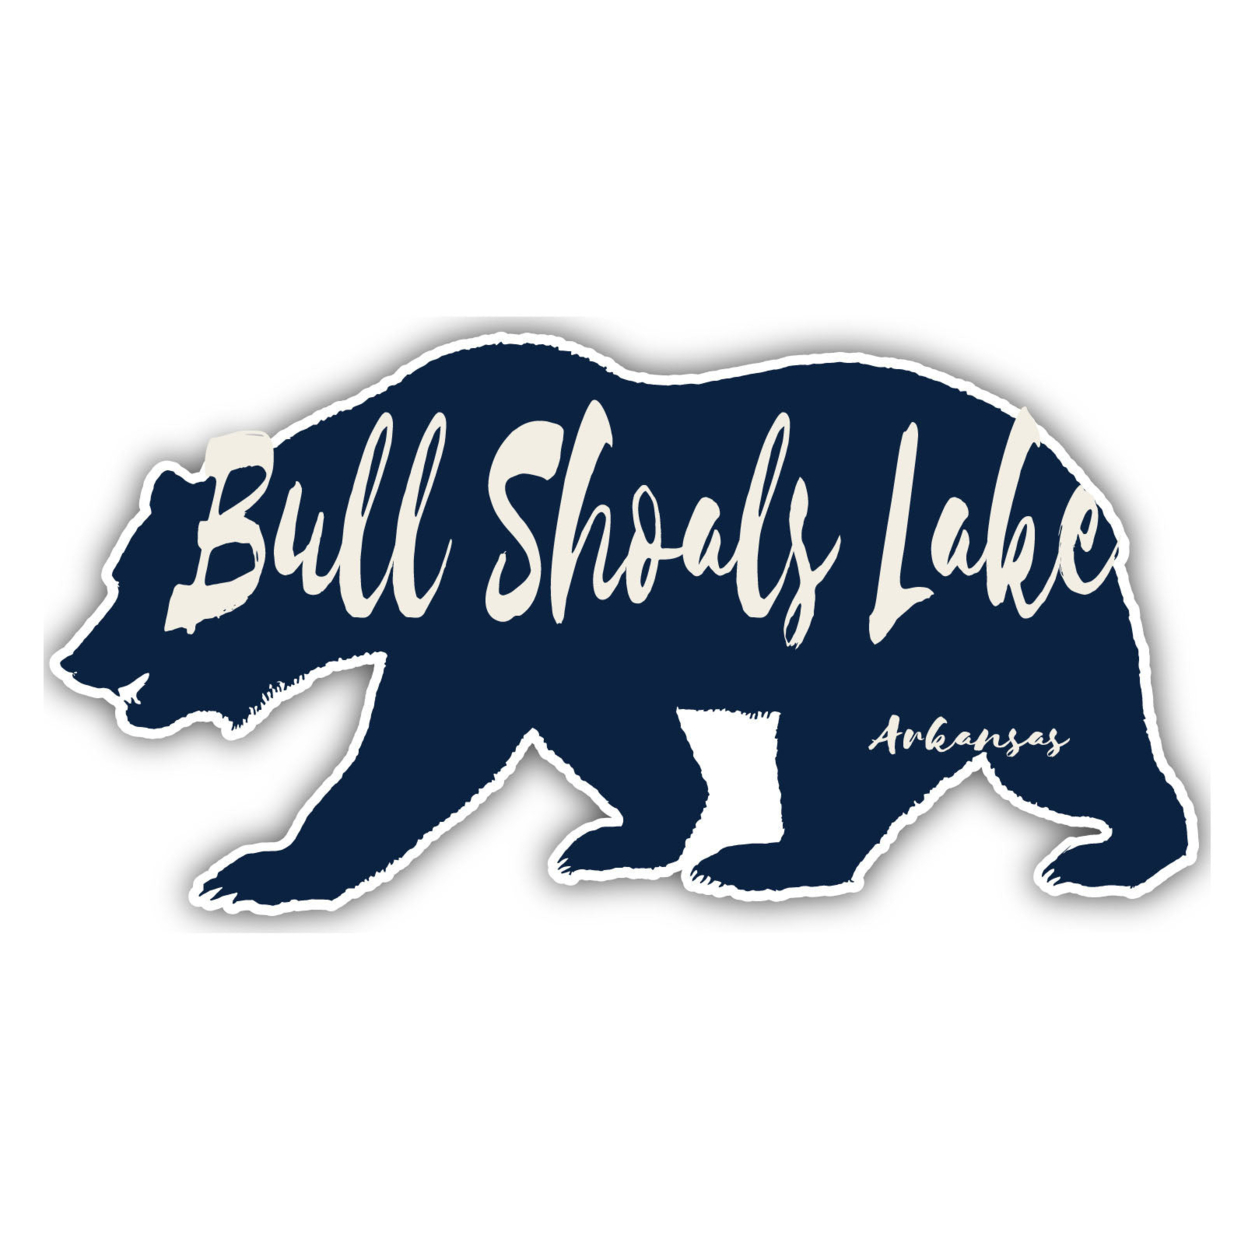 Bull Shoals Lake Arkansas Souvenir Decorative Stickers (Choose Theme And Size) - 4-Pack, 6-Inch, Camp Life